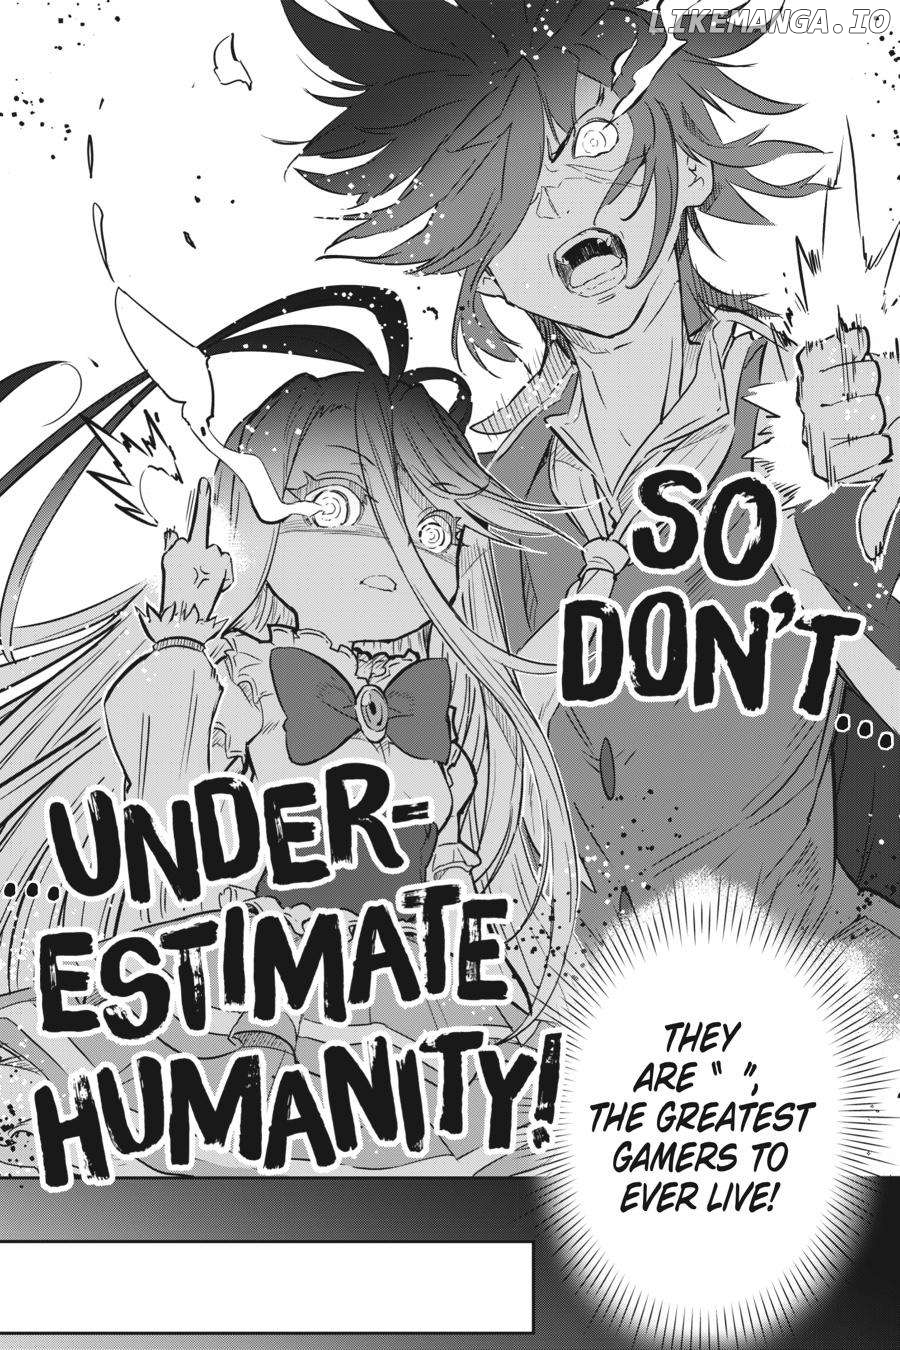 No Game No Life Chapter 2 - Eastern Union Arc Chapter 1 - page 40